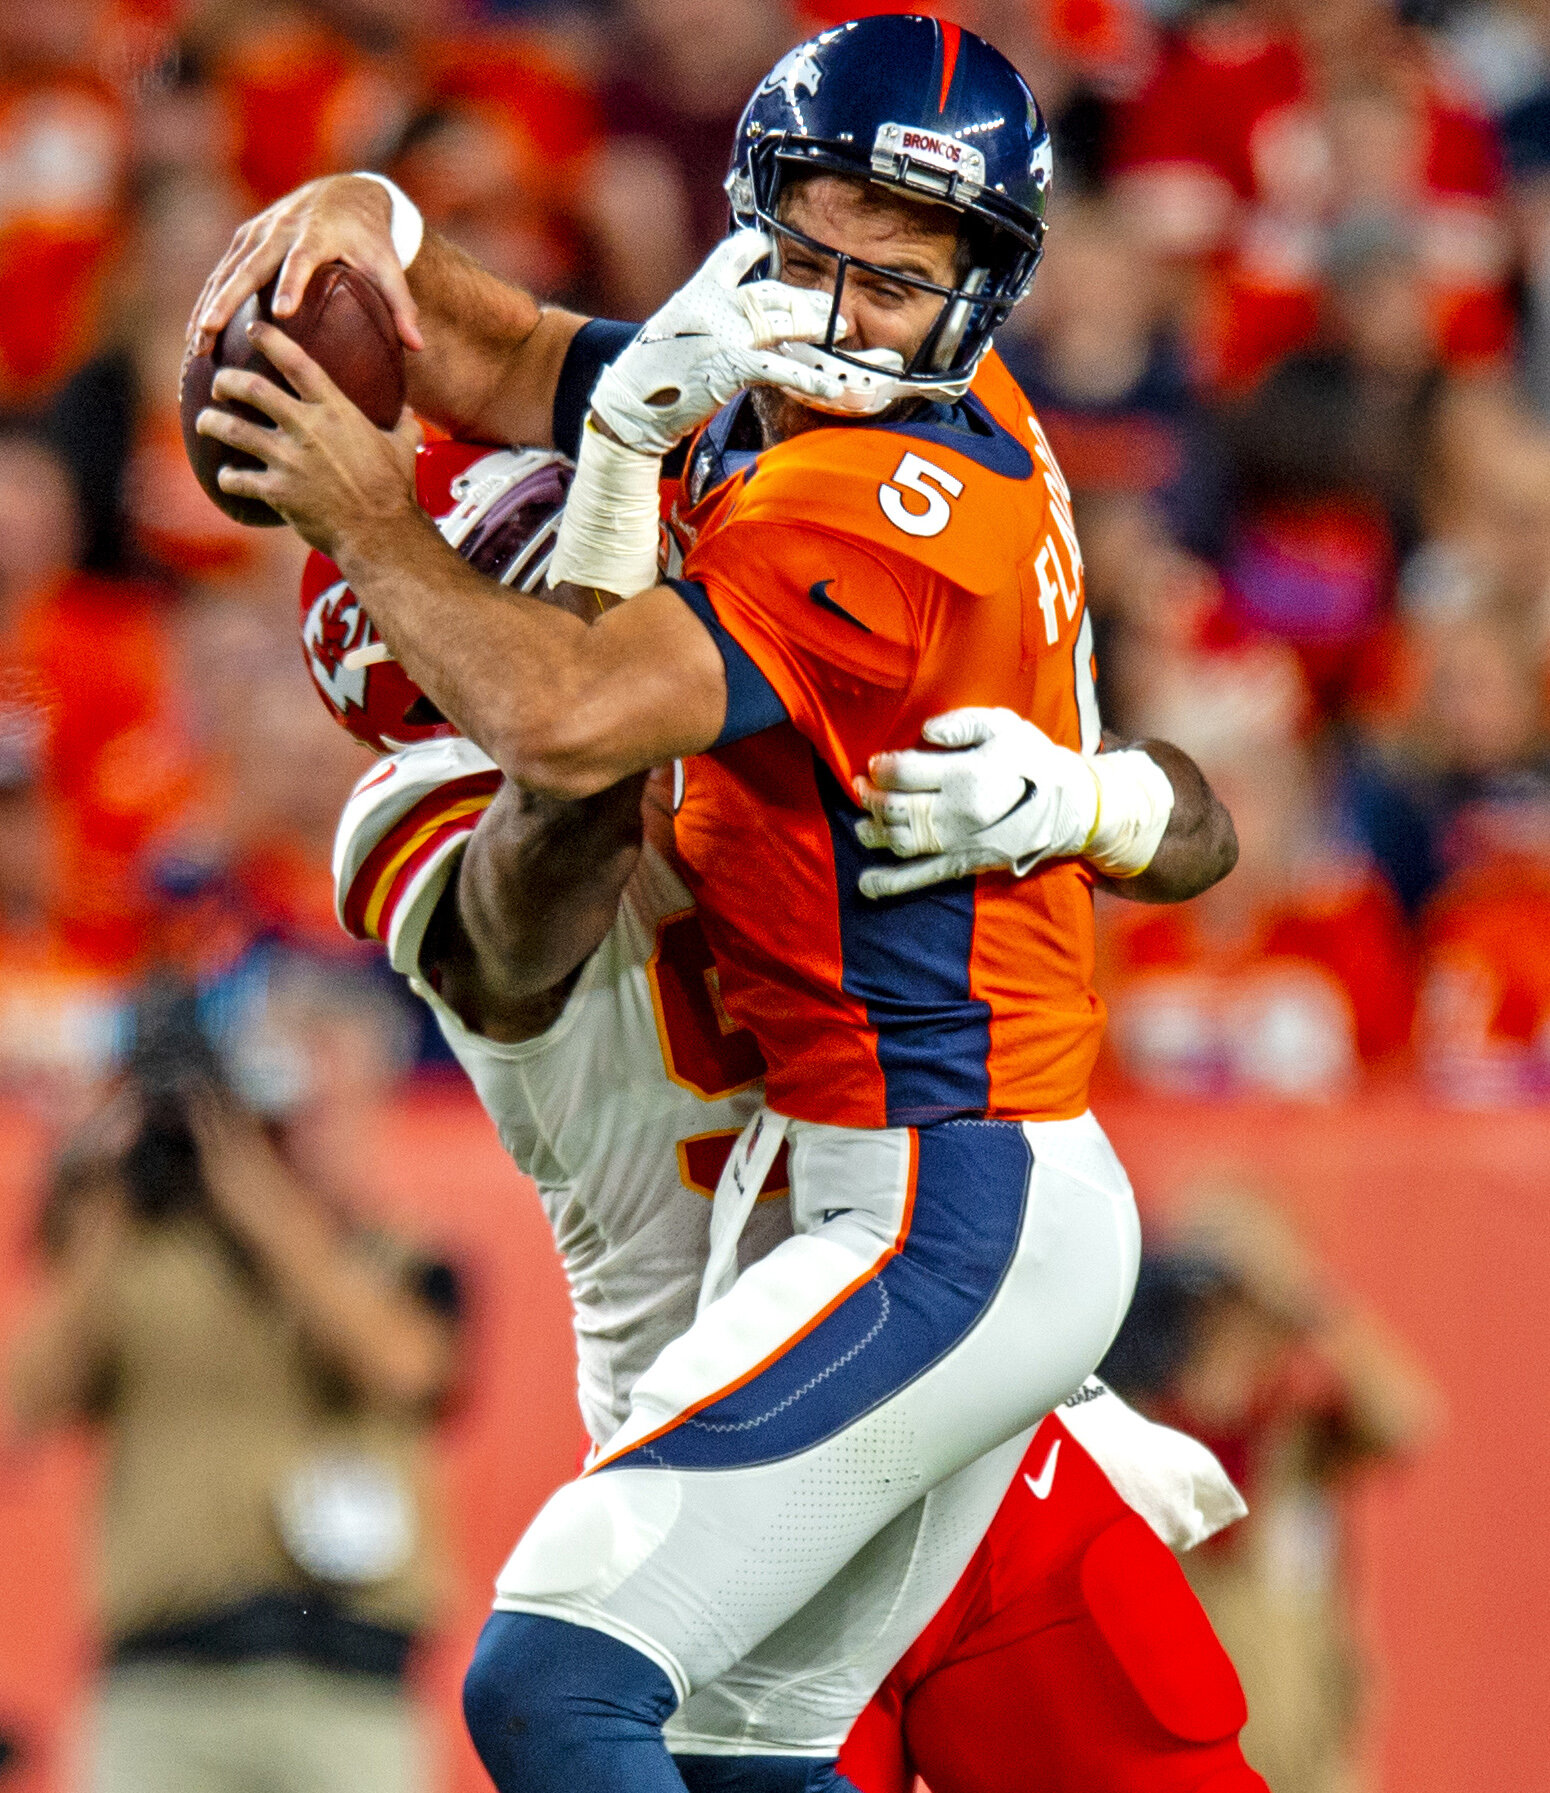  Denver Broncos quarterback Joe Flacco (5) gets sacked by Kansas City Chiefs defensive end Alex Okafor (97) for a three yard loss during the first quarter of the Broncos game against the Kansas City Chiefs at Empower Field at Mile High in Denver, Col